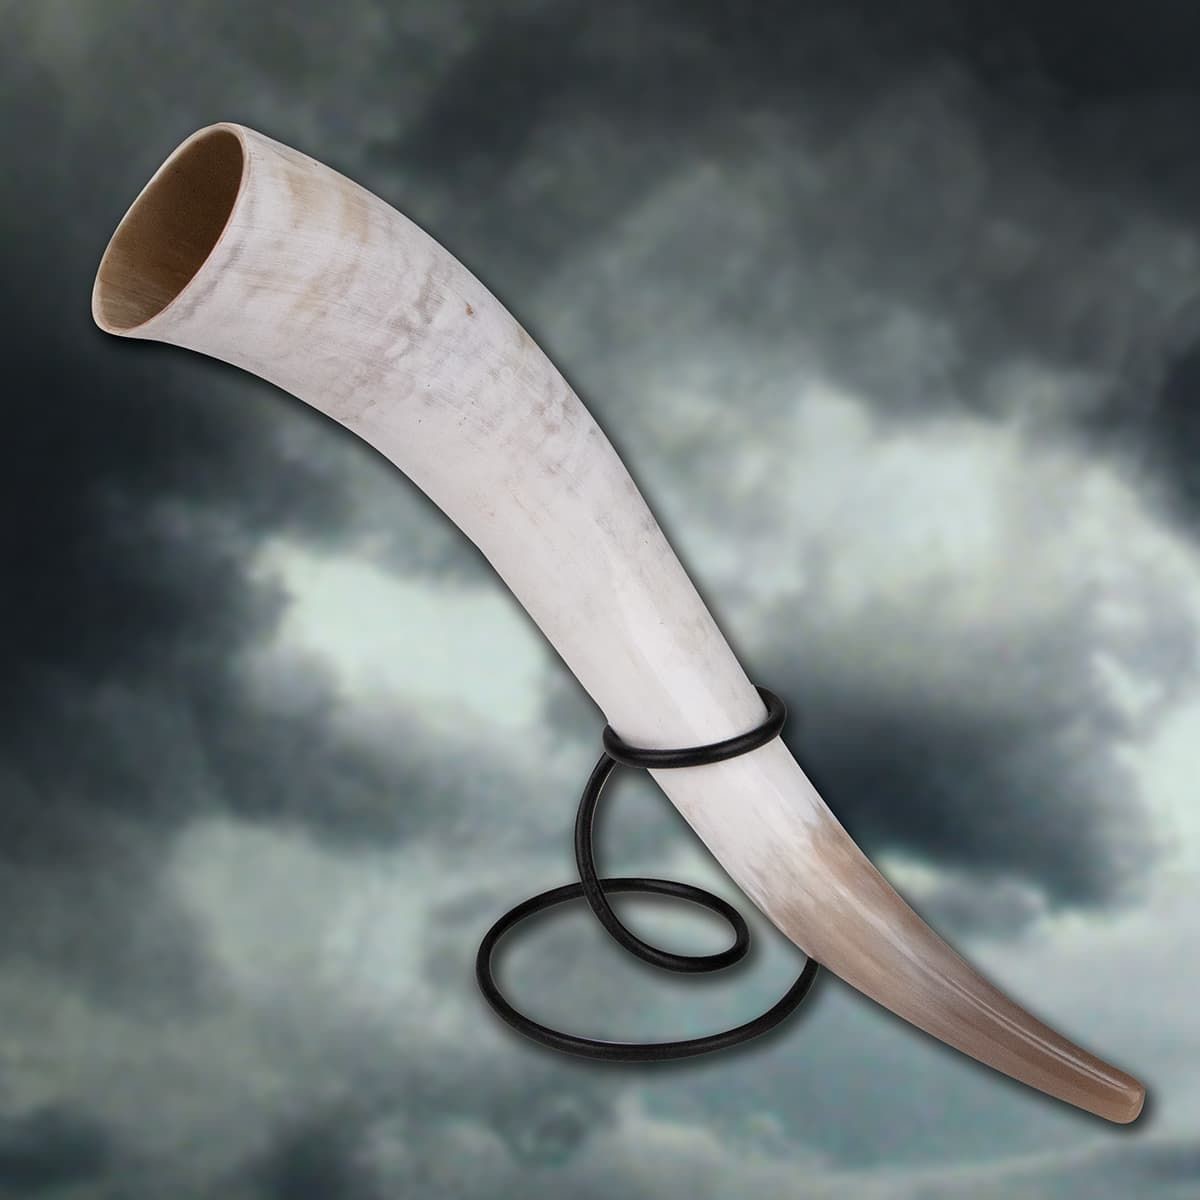 Loki’s Oversized Drinking Horn with Iron Stand